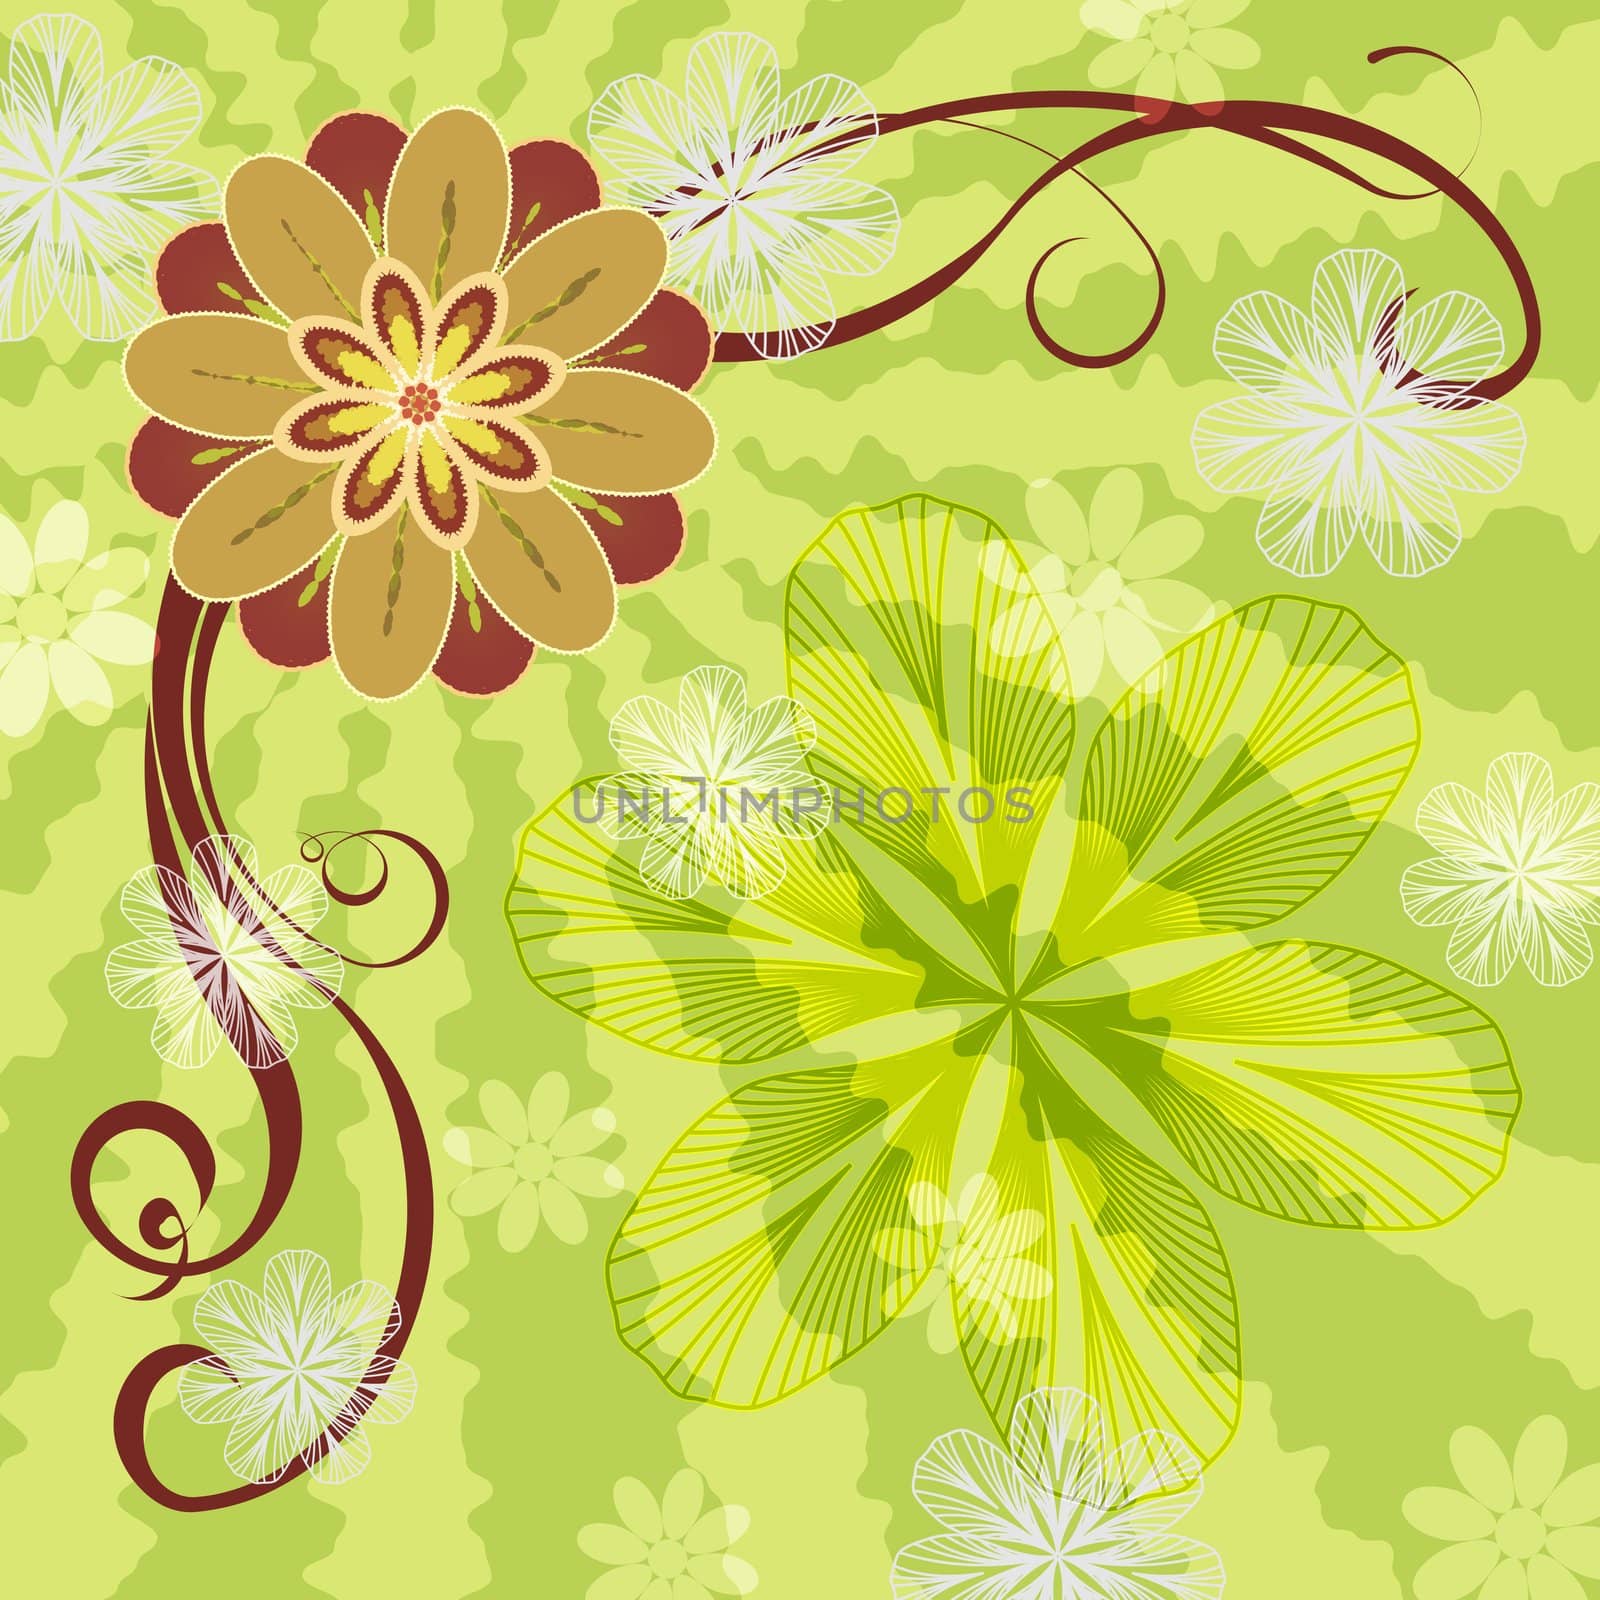 Abstract illustration - flowers ni green red and orange colors